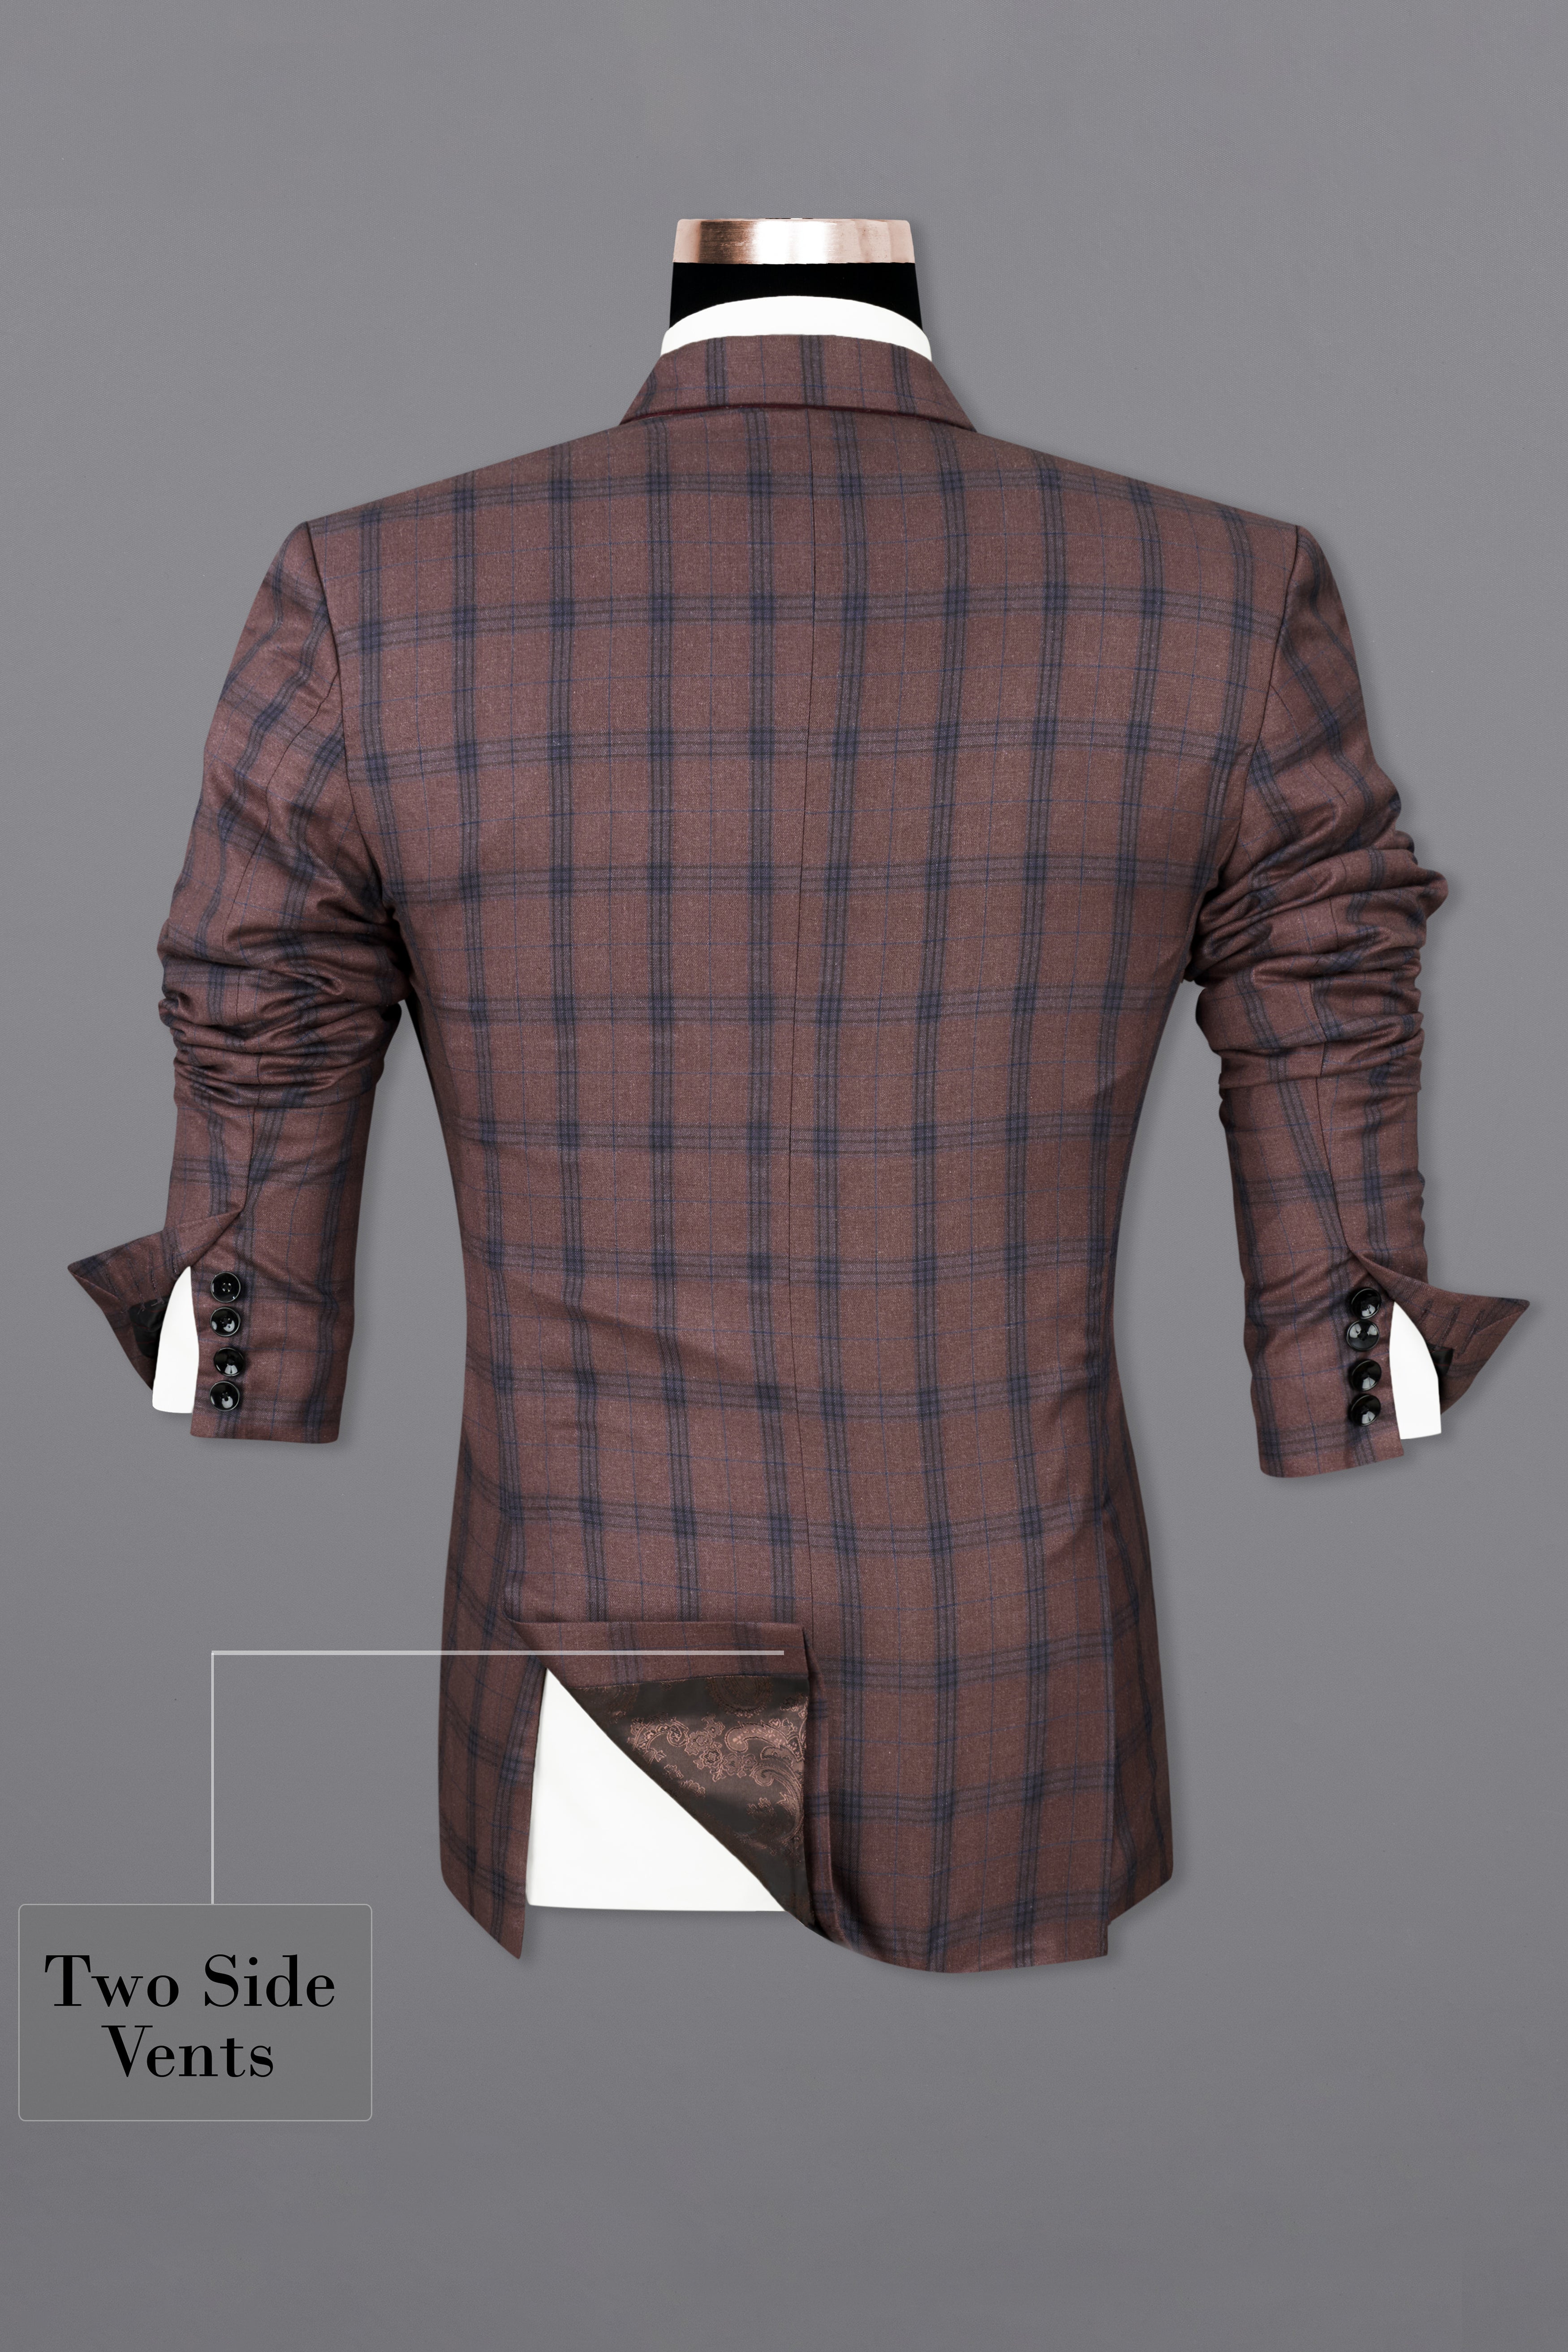 Taupe Brown Plaid Single Breasted Suit